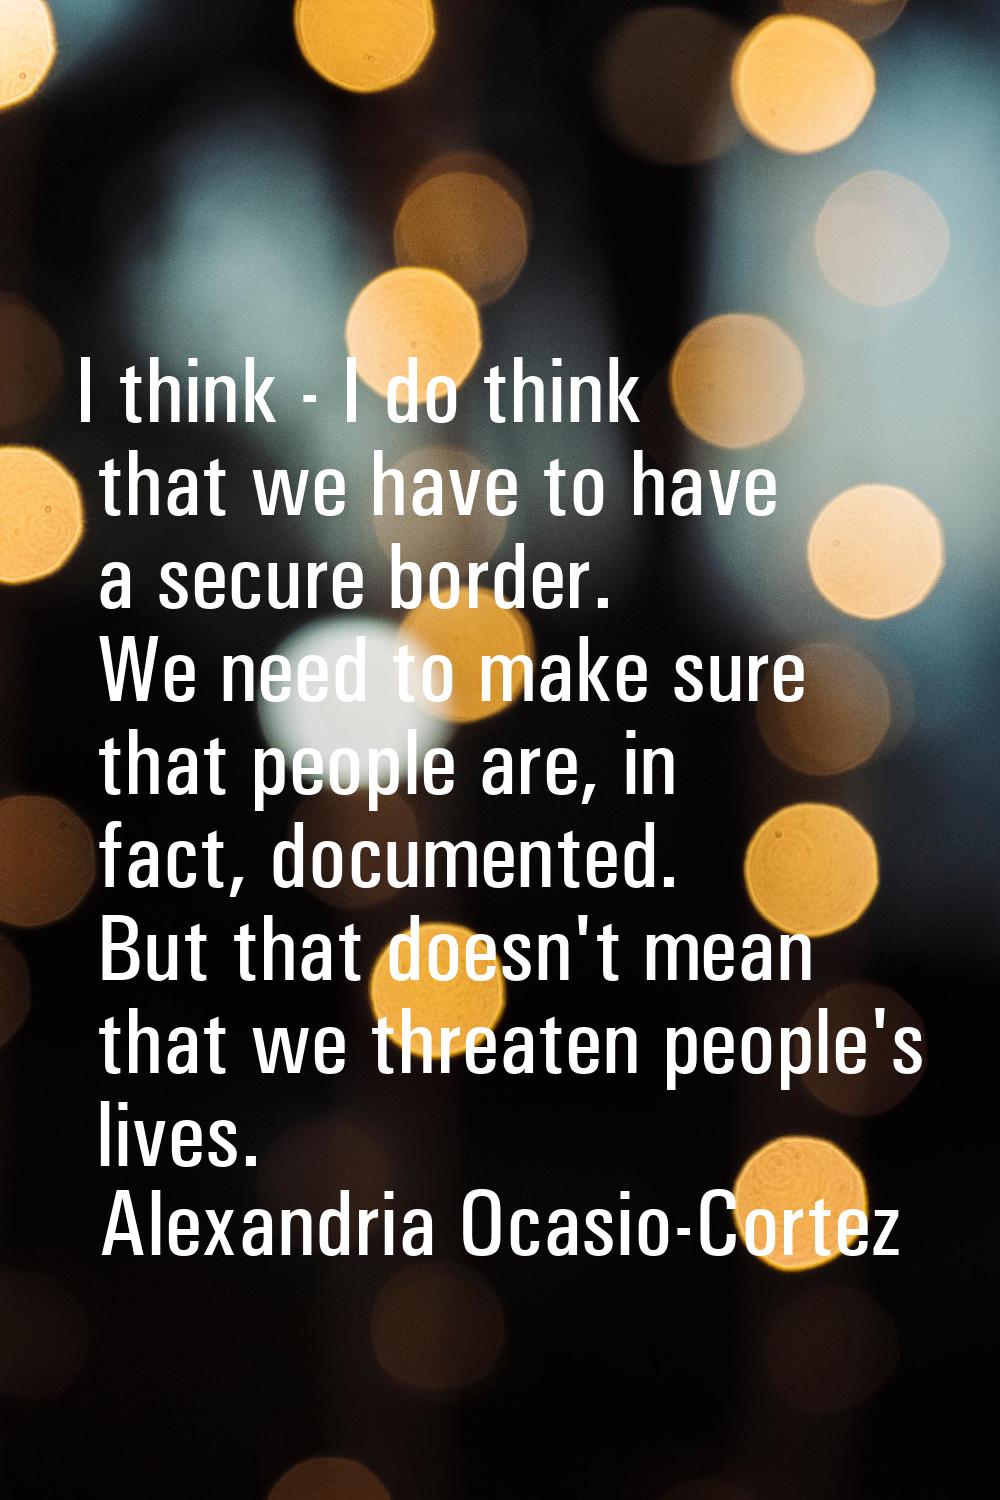 I think - I do think that we have to have a secure border. We need to make sure that people are, in